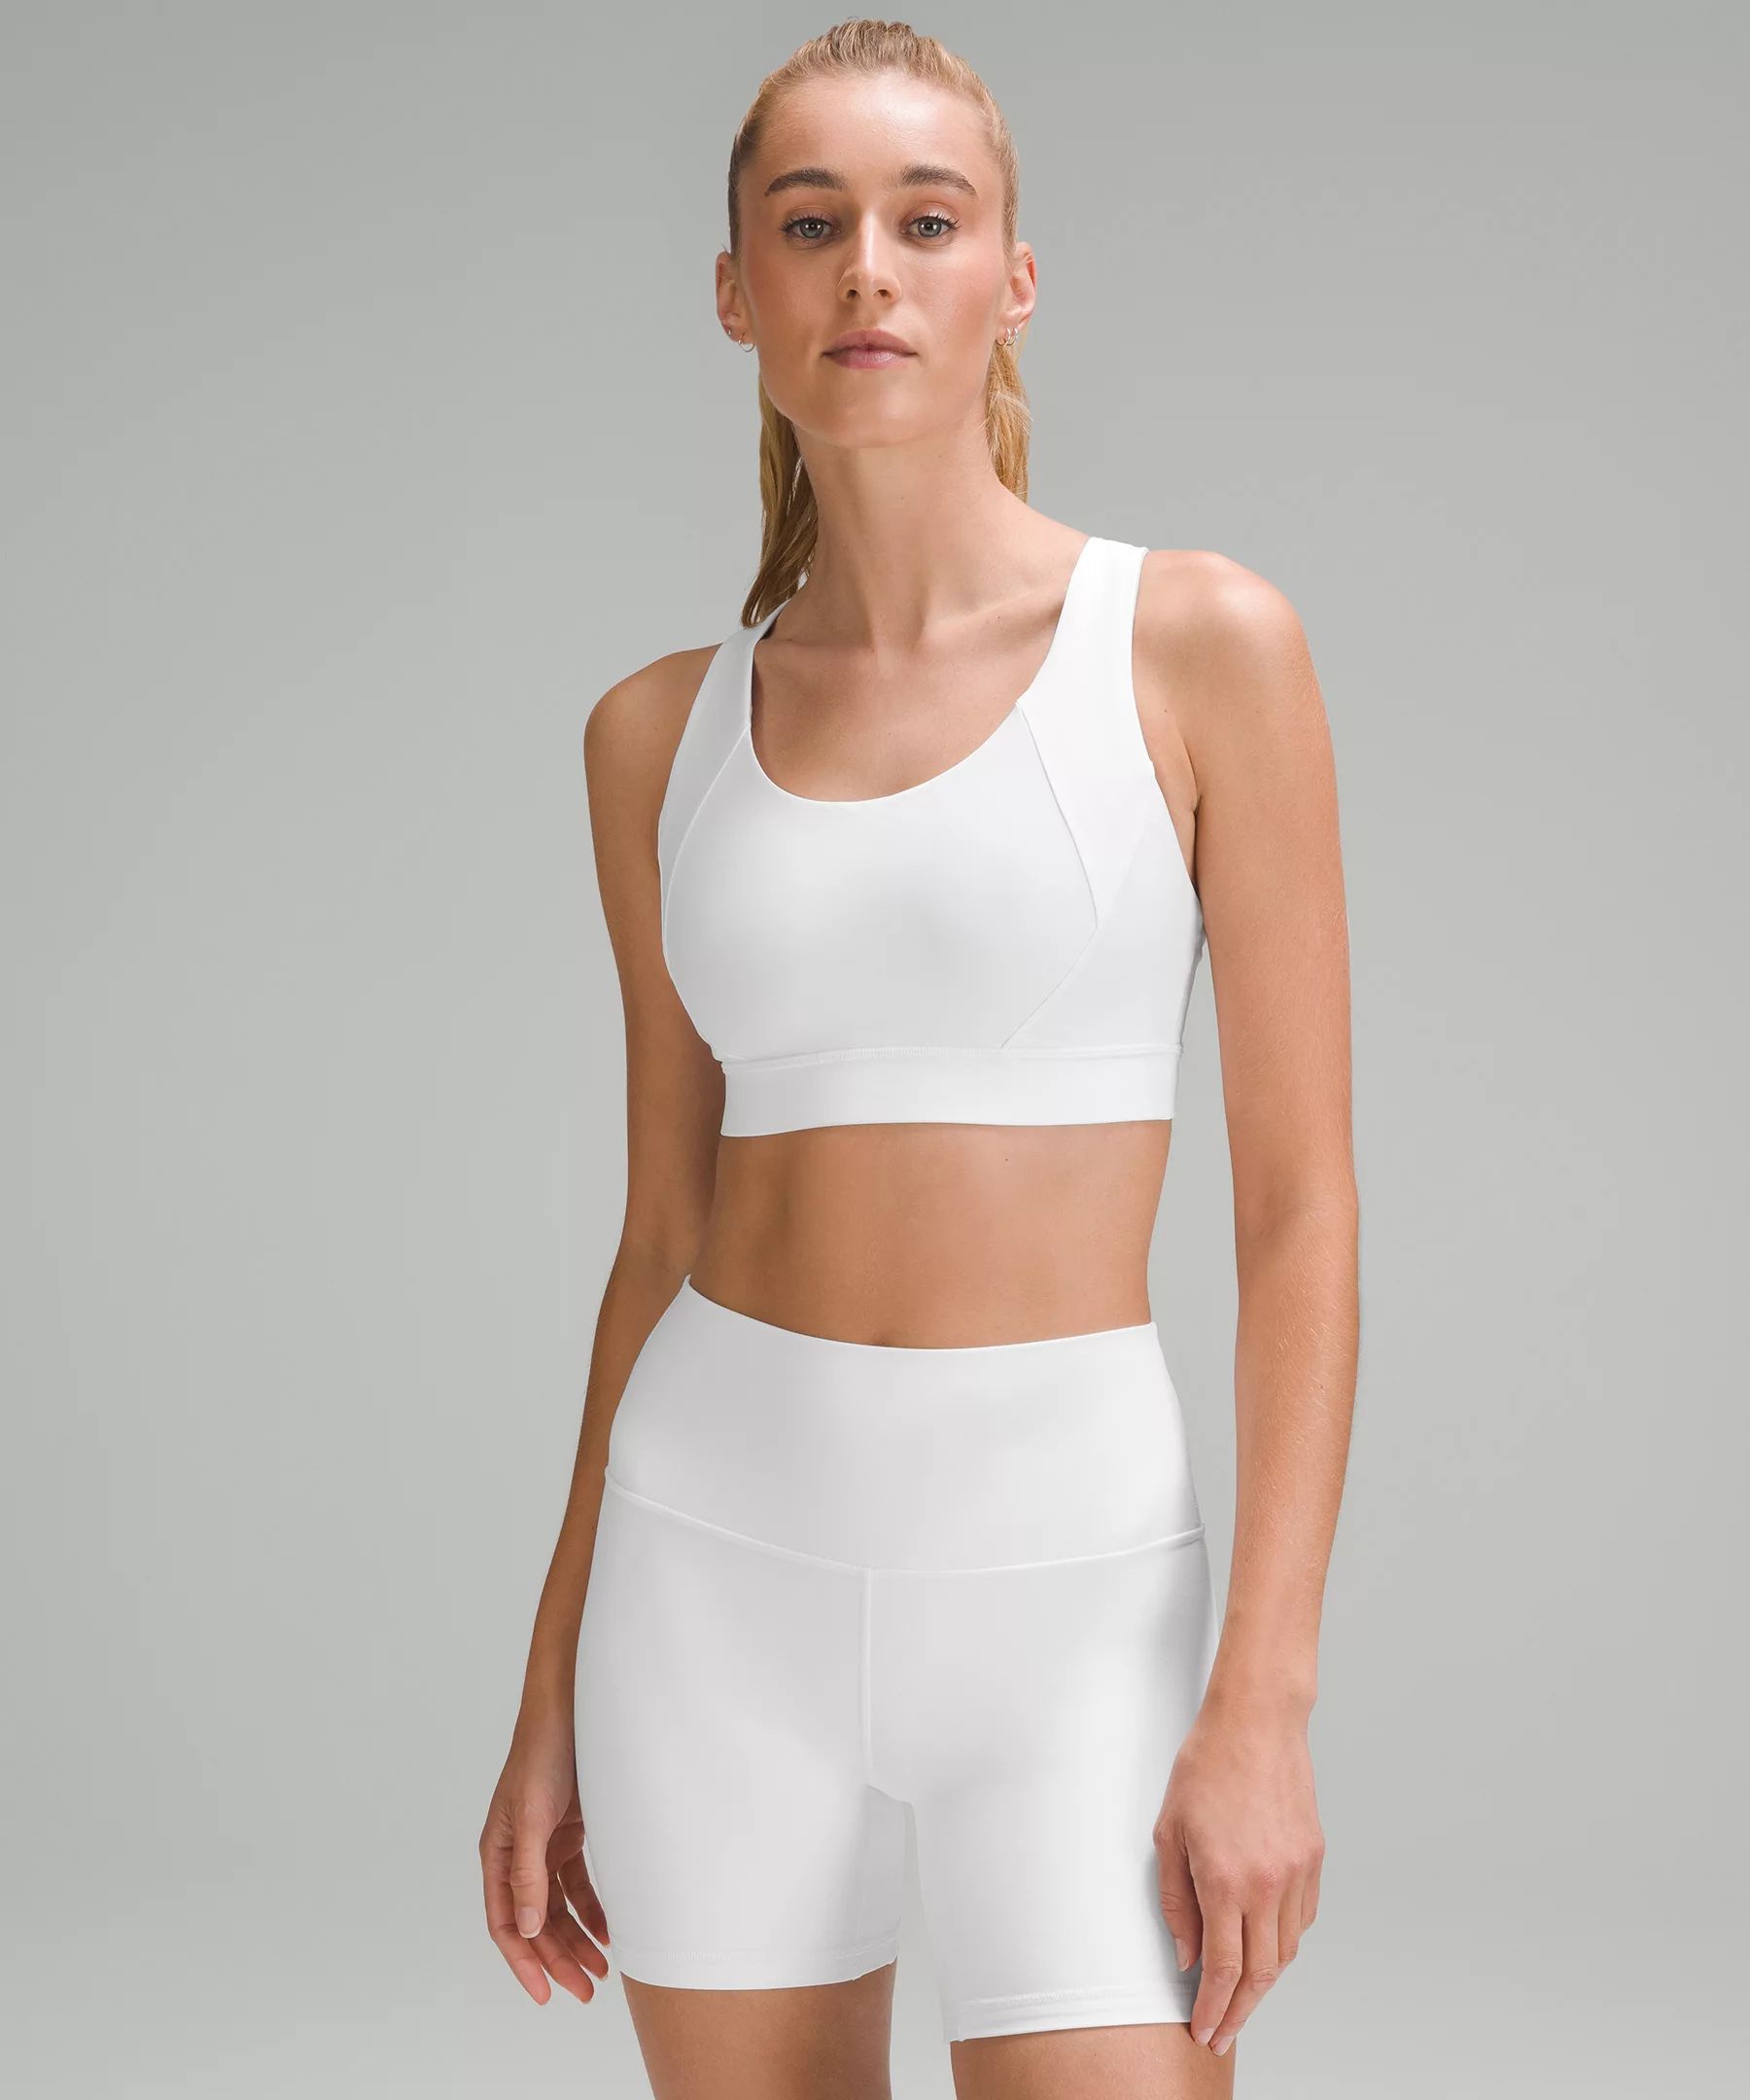 Free To Be Elevated Bra Light Support, DD/E Cup | Lululemon (US)